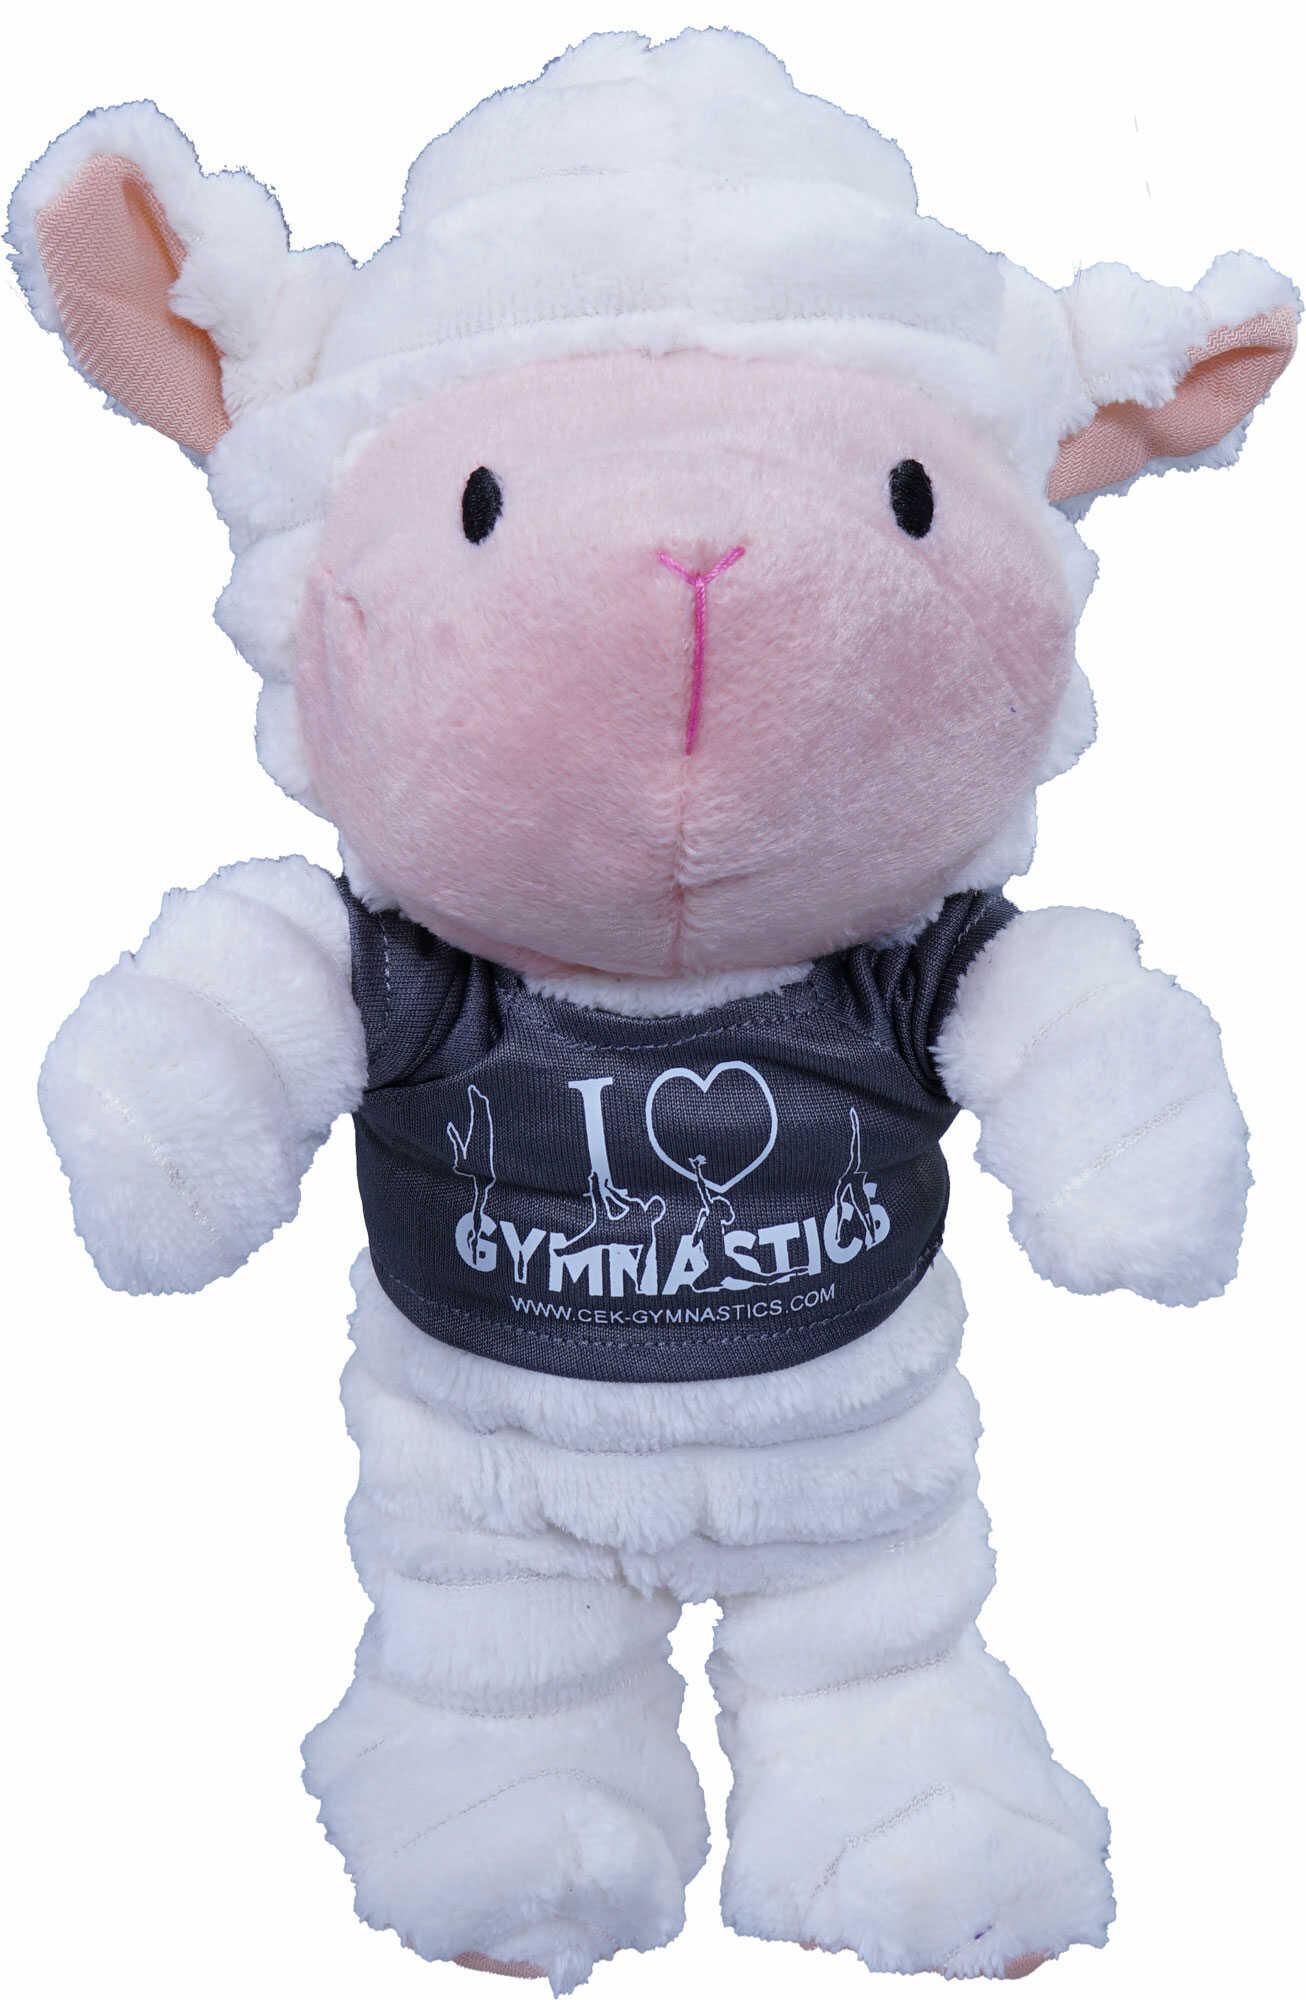 Sheep cuddly toy with promo t-shirt